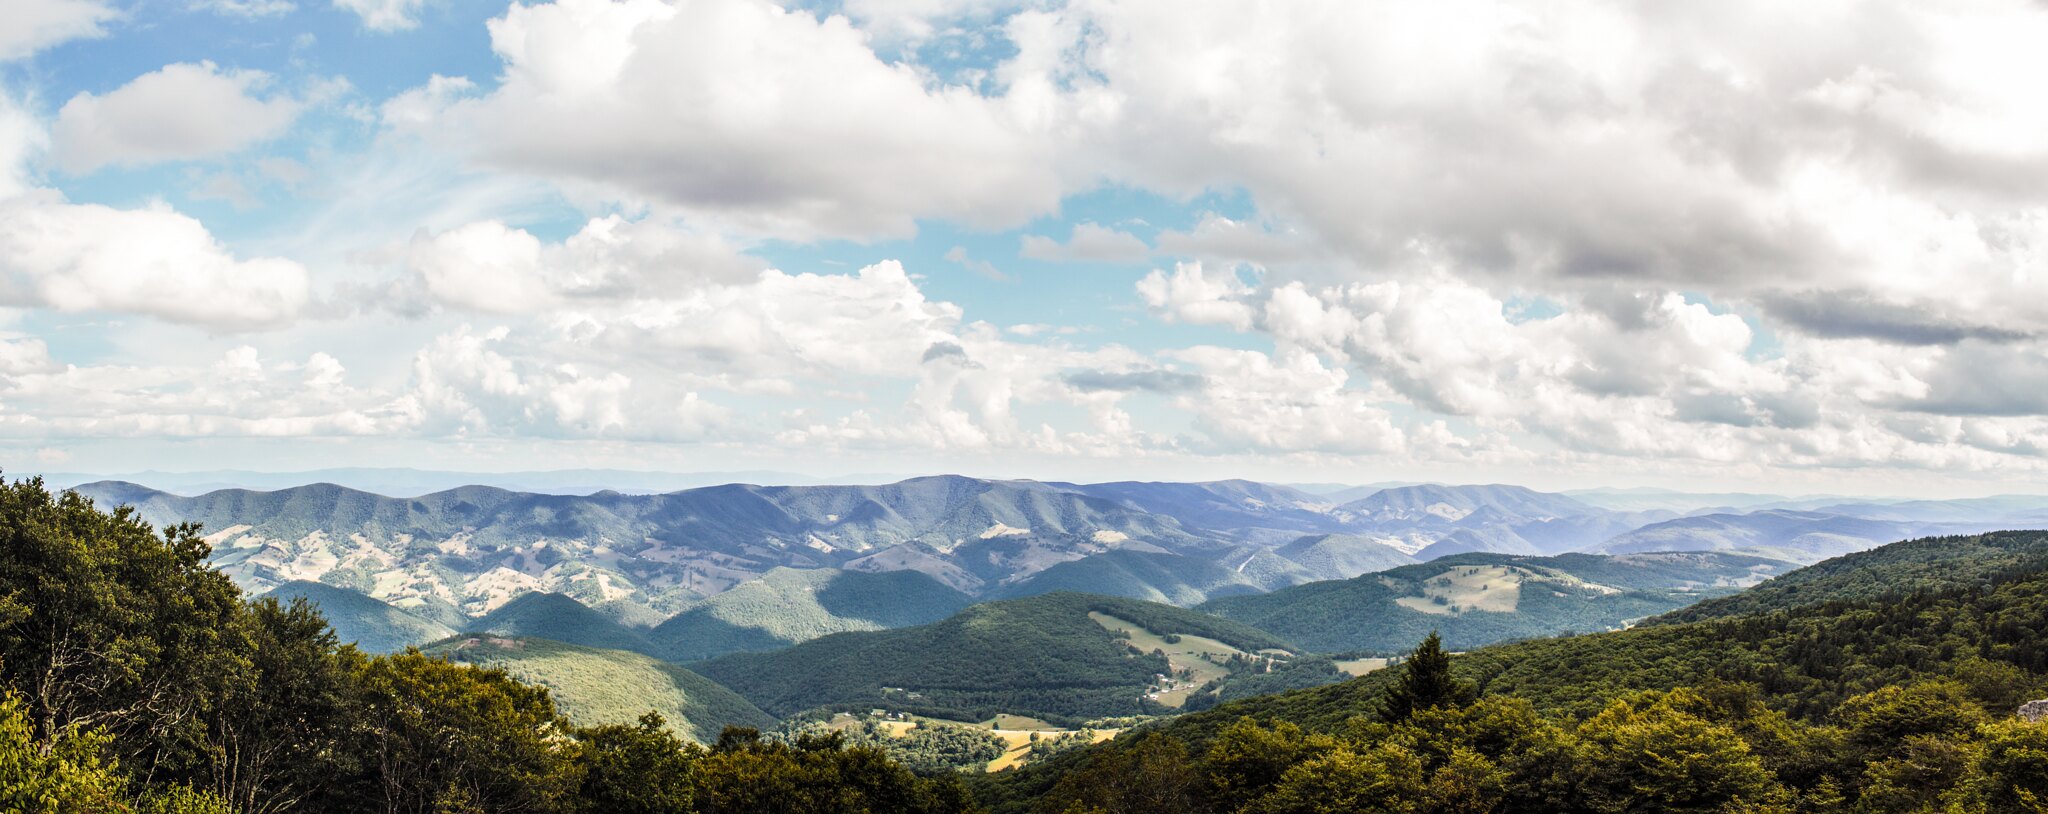 Composite photograph showing an eastward view from the top of Spruce Knob, West Virginia.